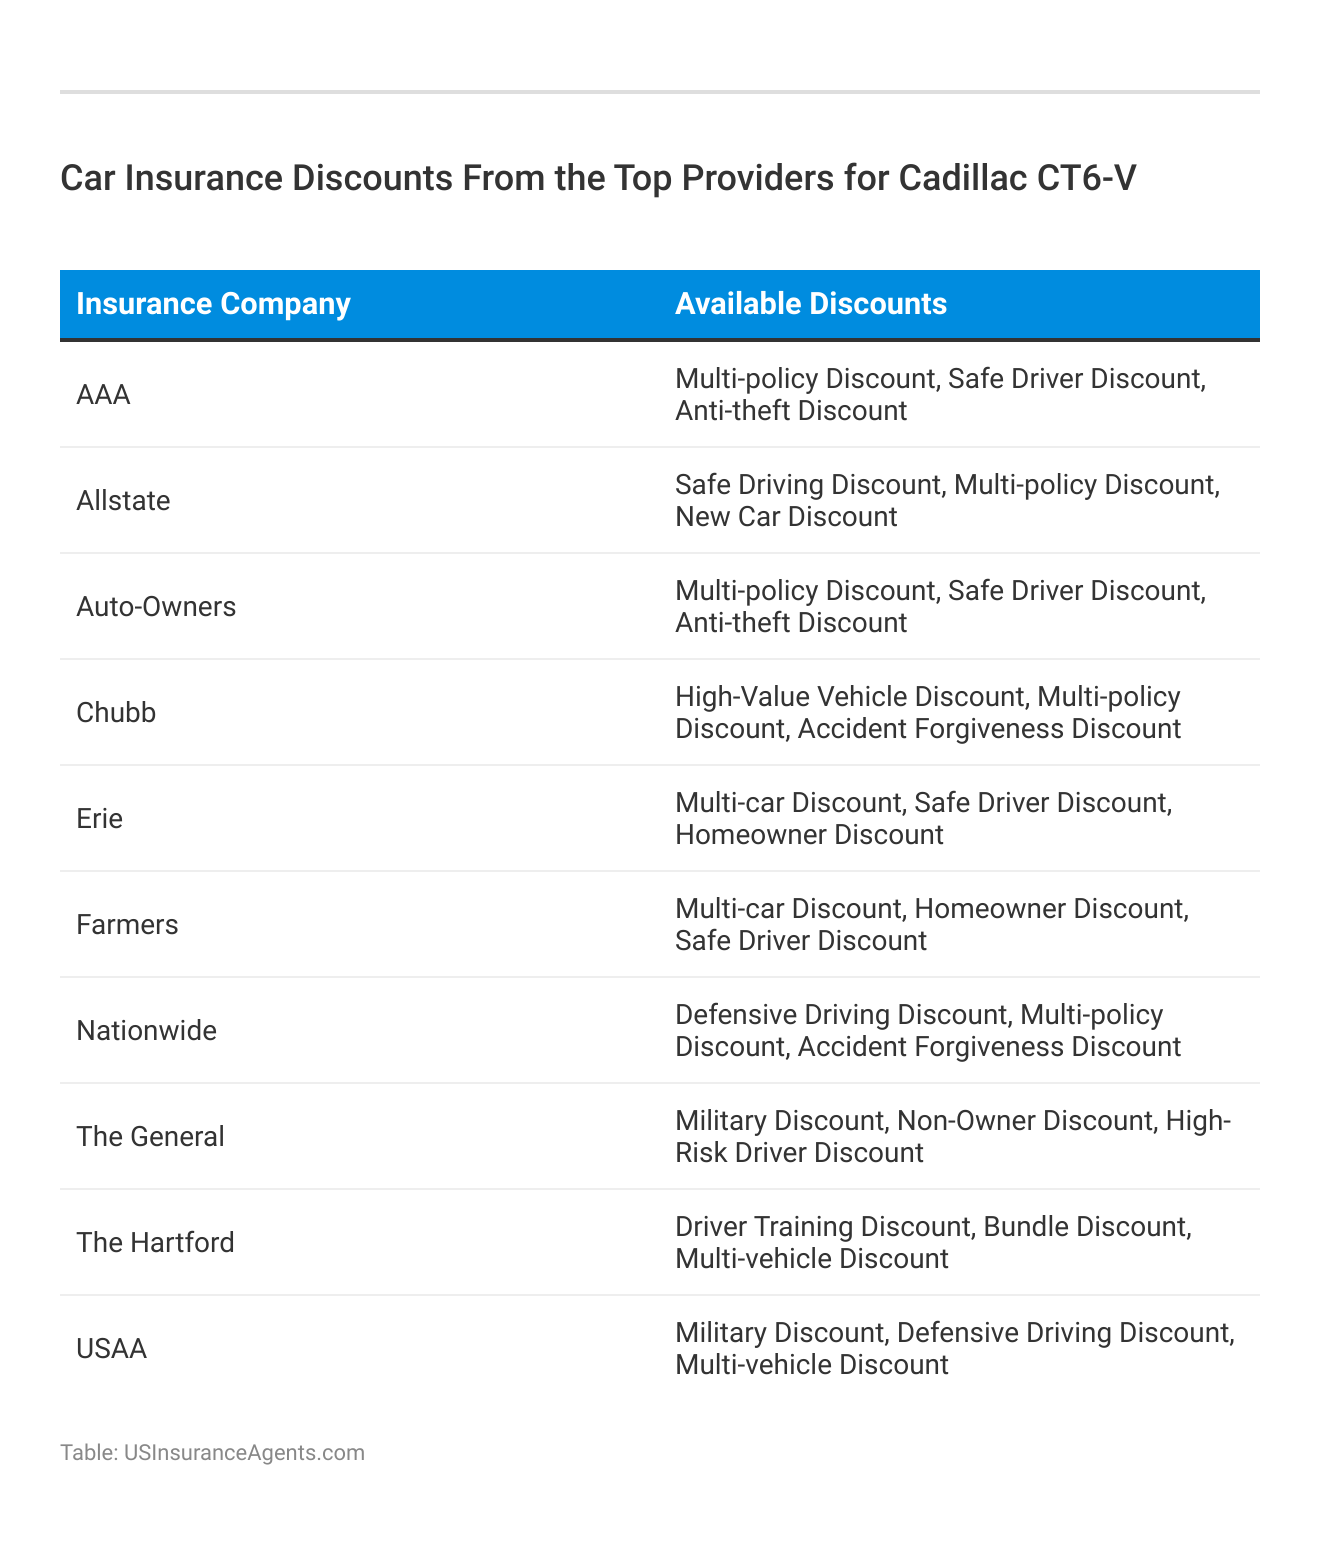 <h3>Car Insurance Discounts From the Top Providers for Cadillac CT6-V</h3>